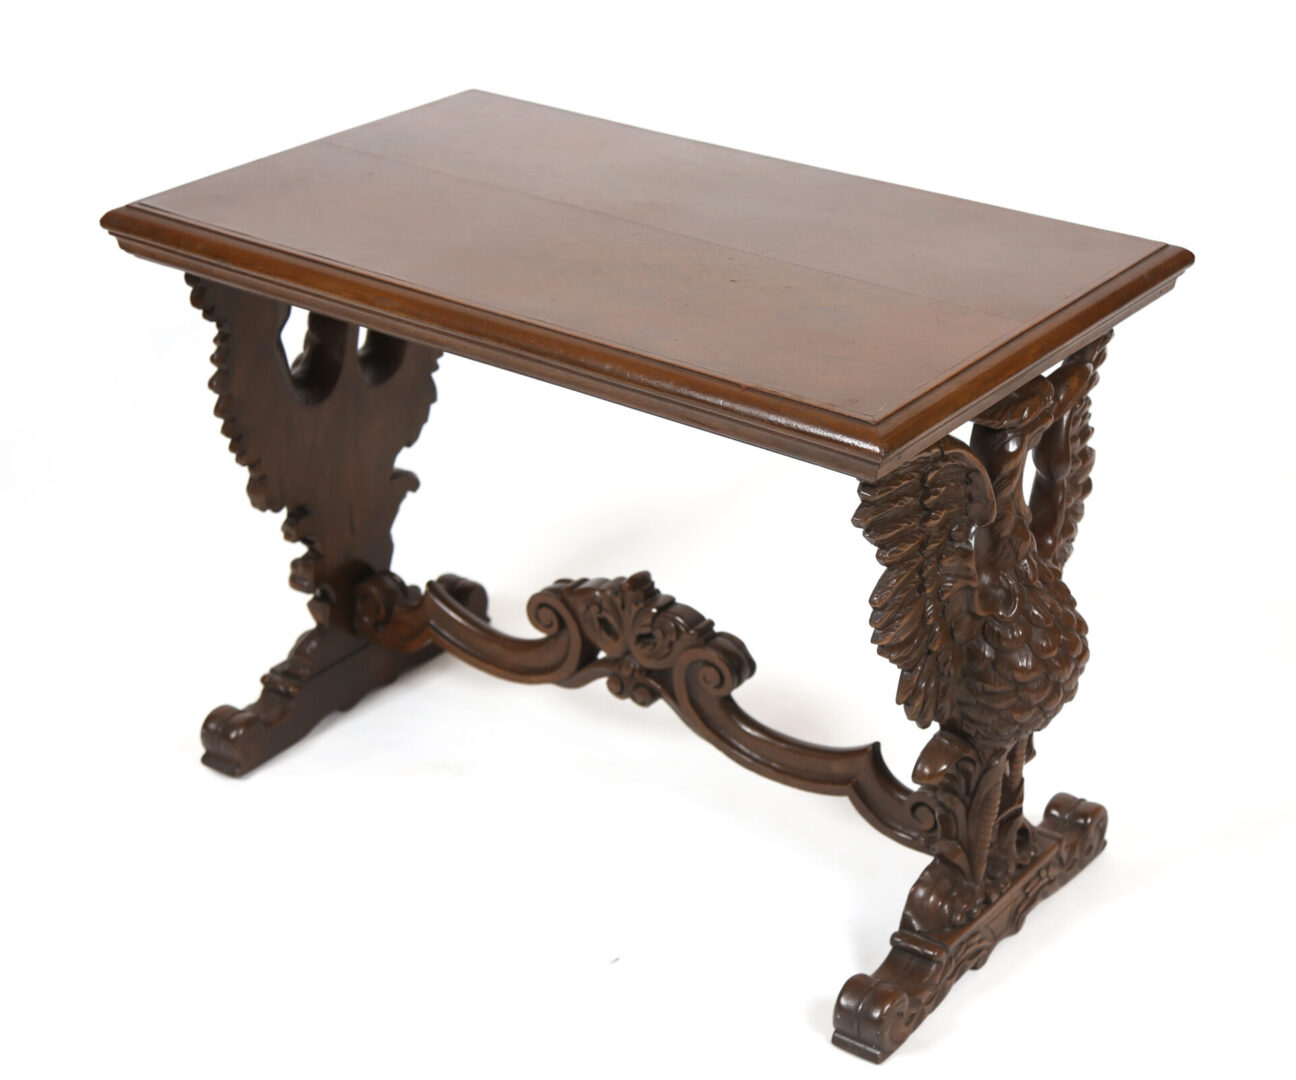 A wooden table with carved legs and a brown top.